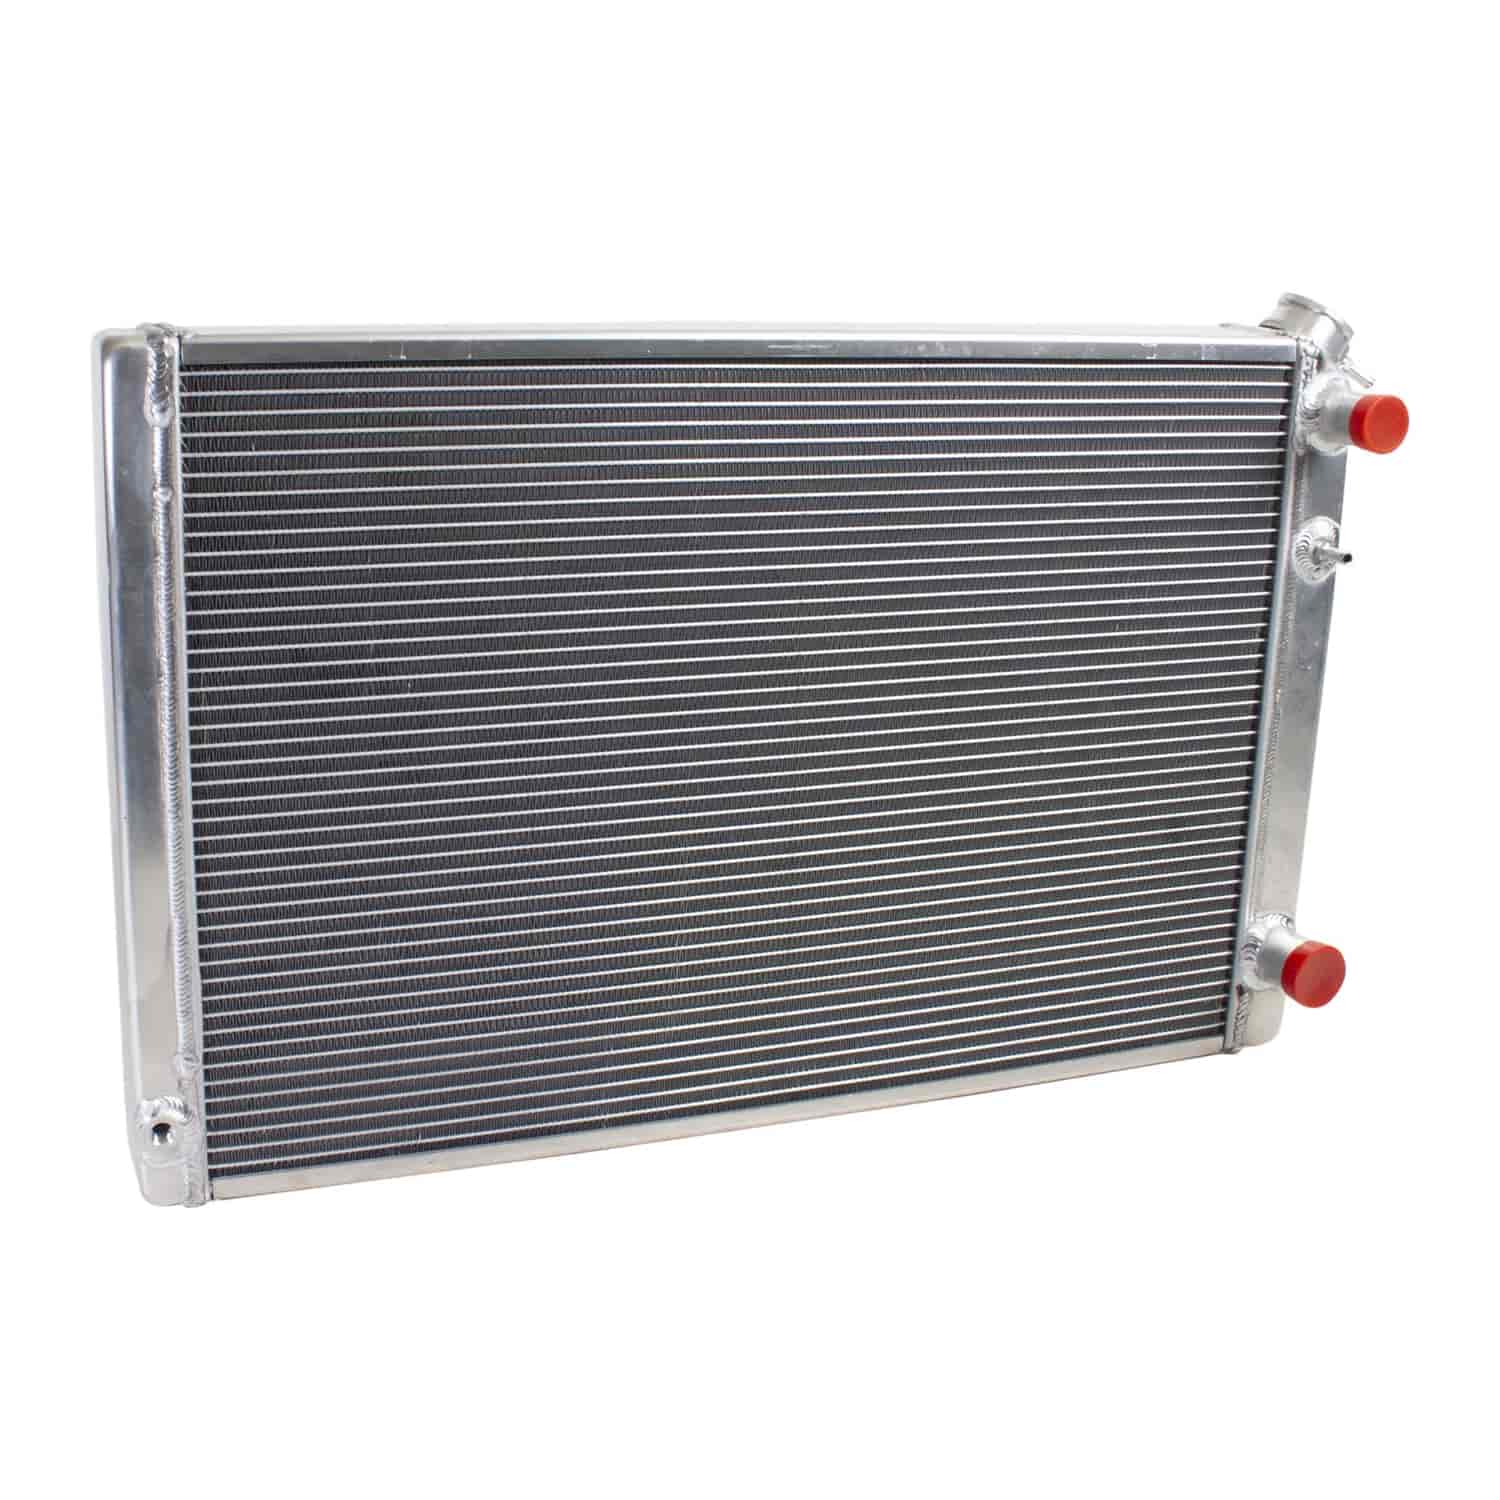 PerformanceFit Radiator 1979-1993 Ford Mustang for LS Swap